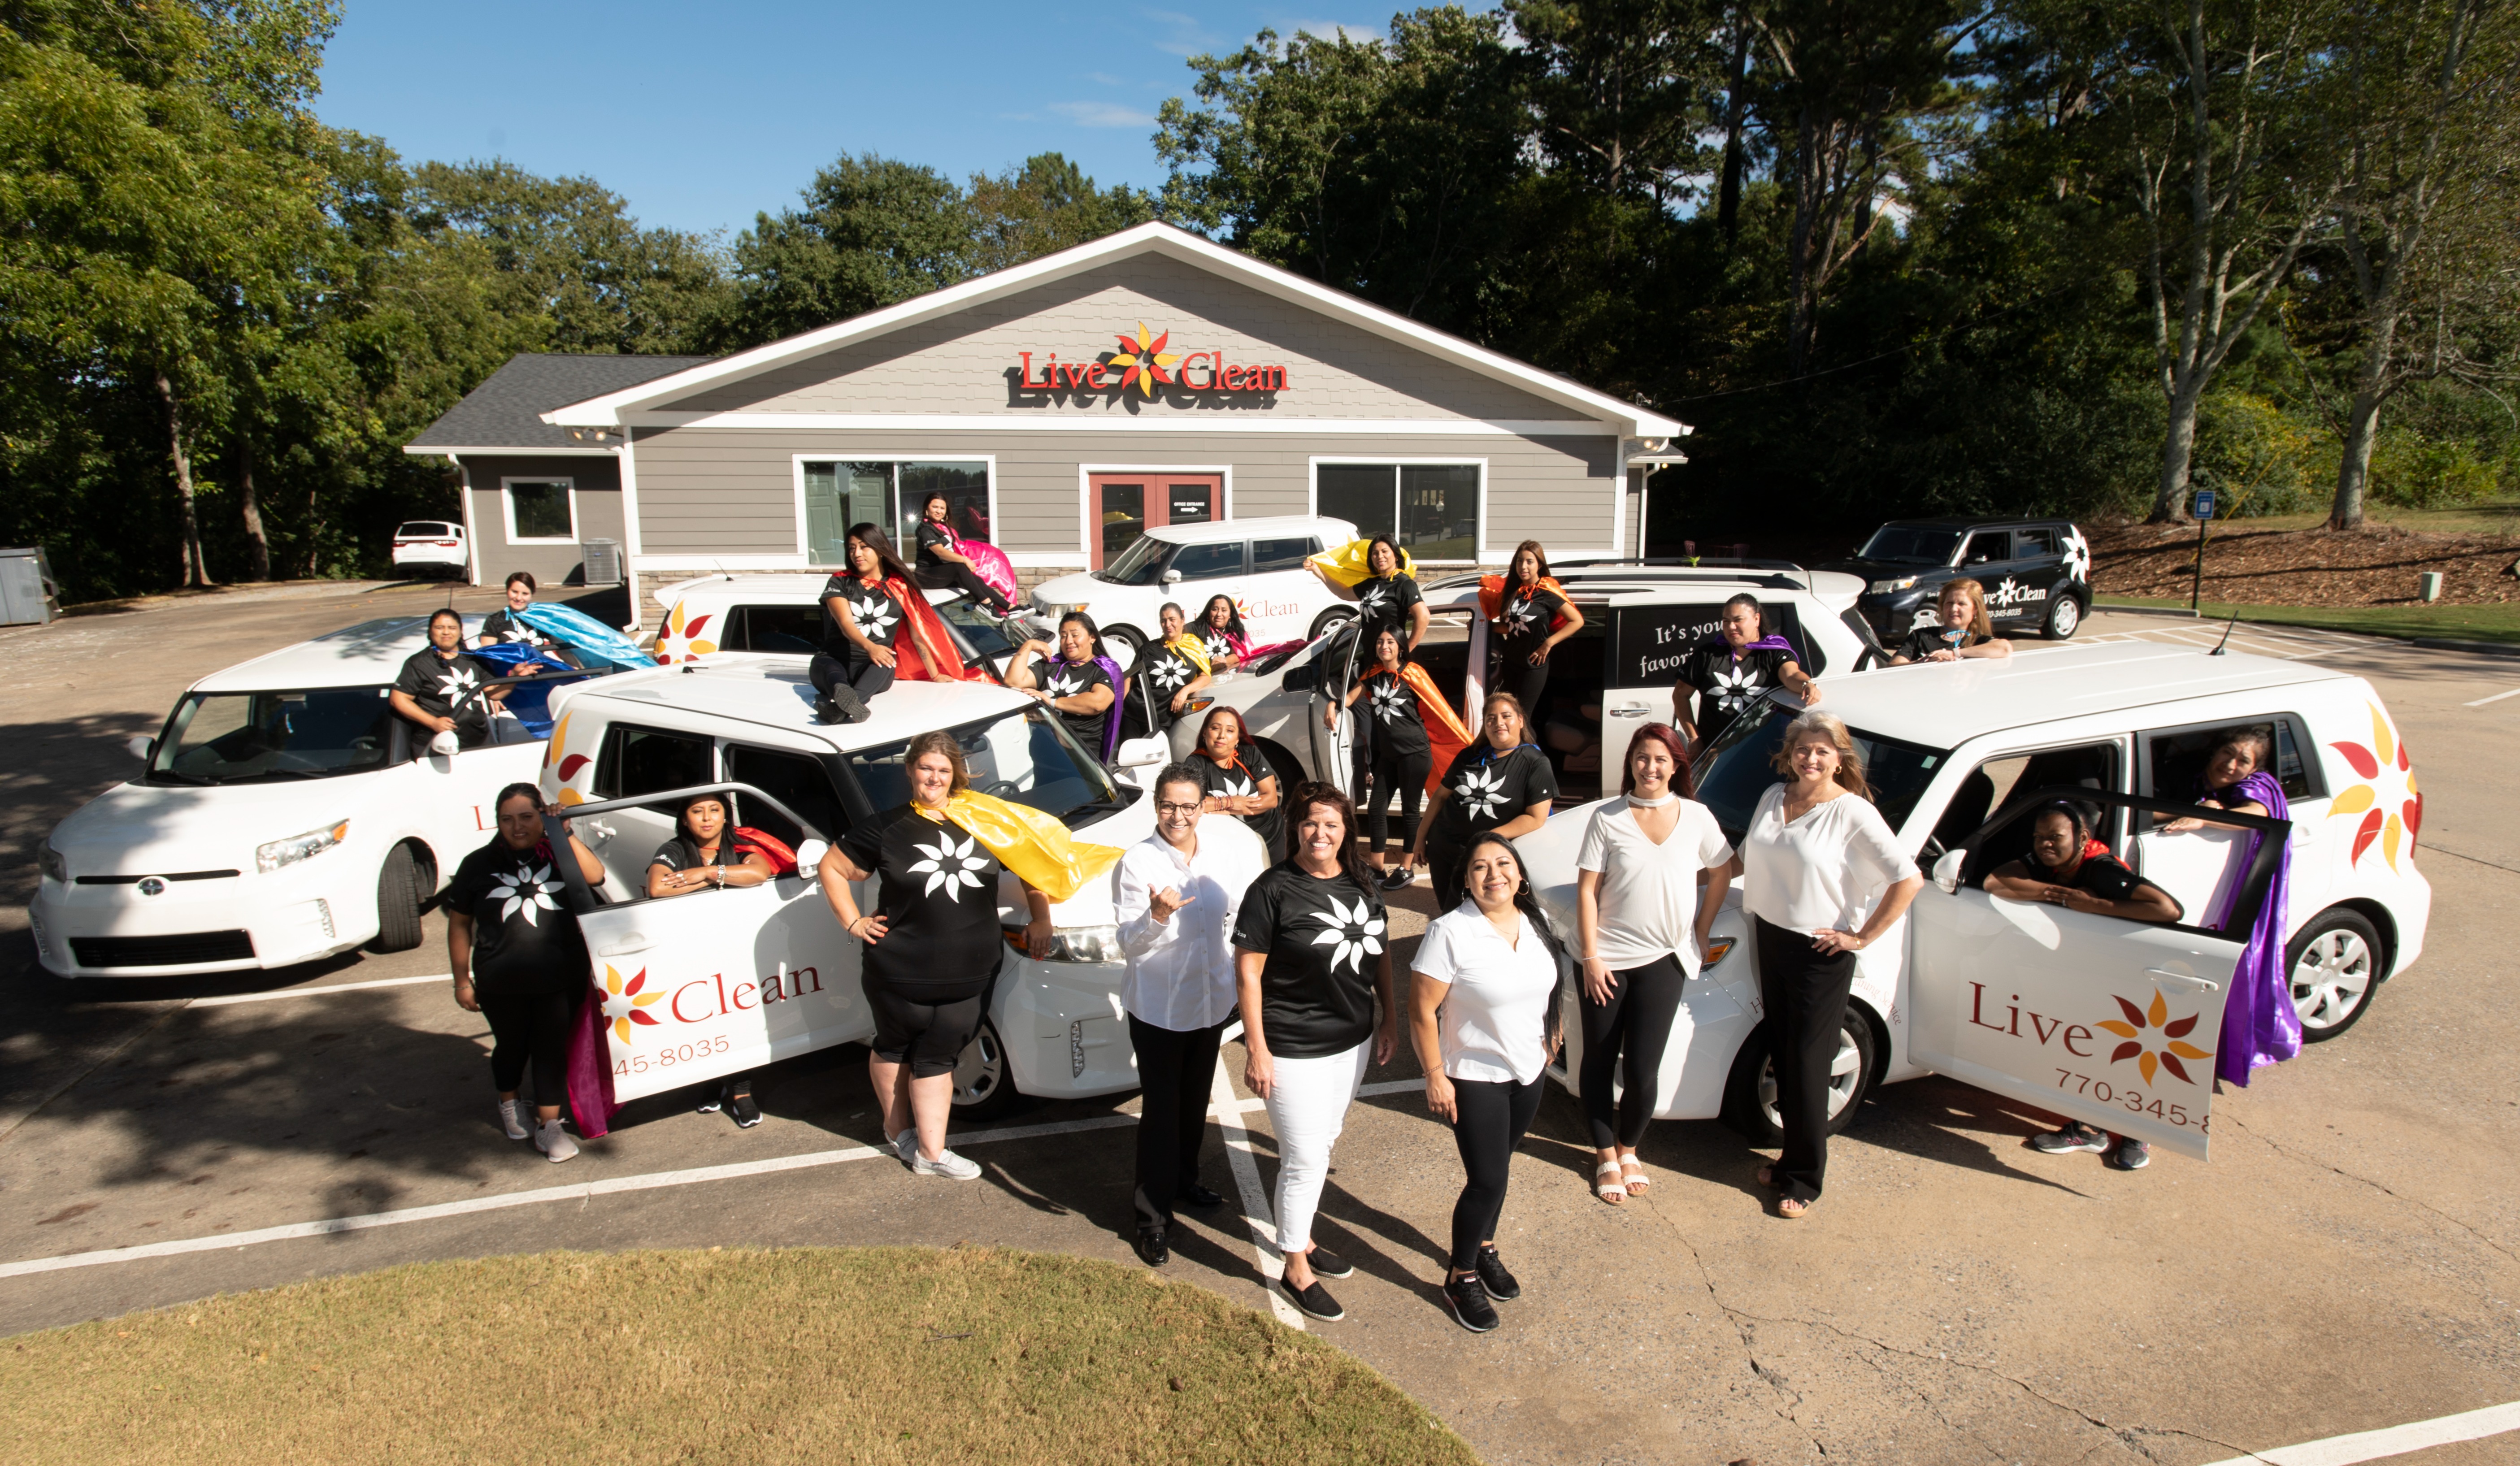 Group picture of Live Clean Inc. employees outside of their Holly Springs location in Georgia.